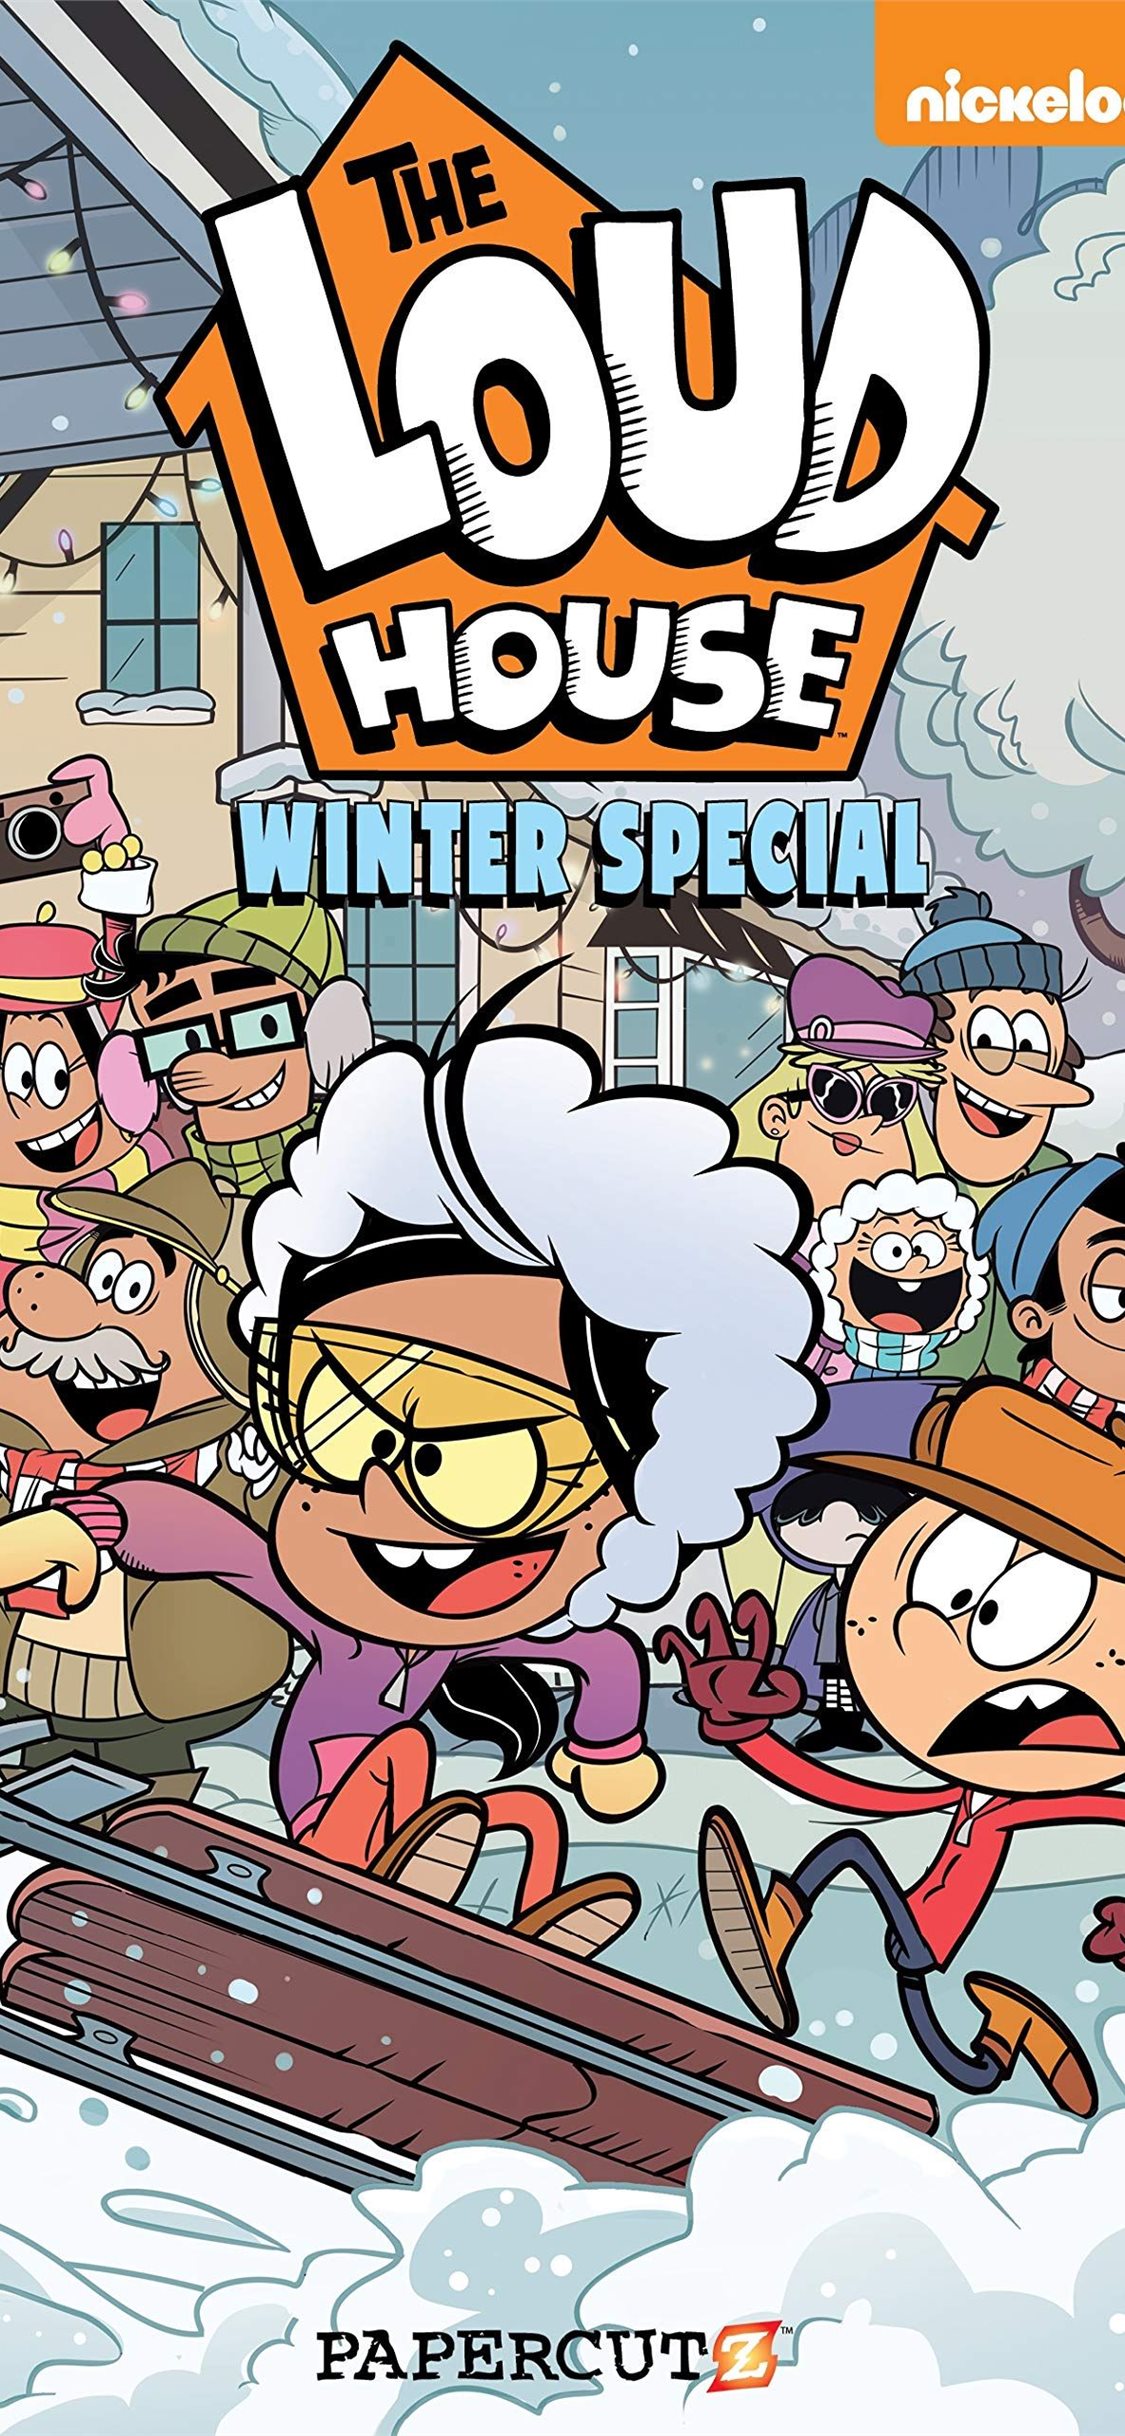 Download The Loud House wallpapers for mobile phone free The Loud House  HD pictures